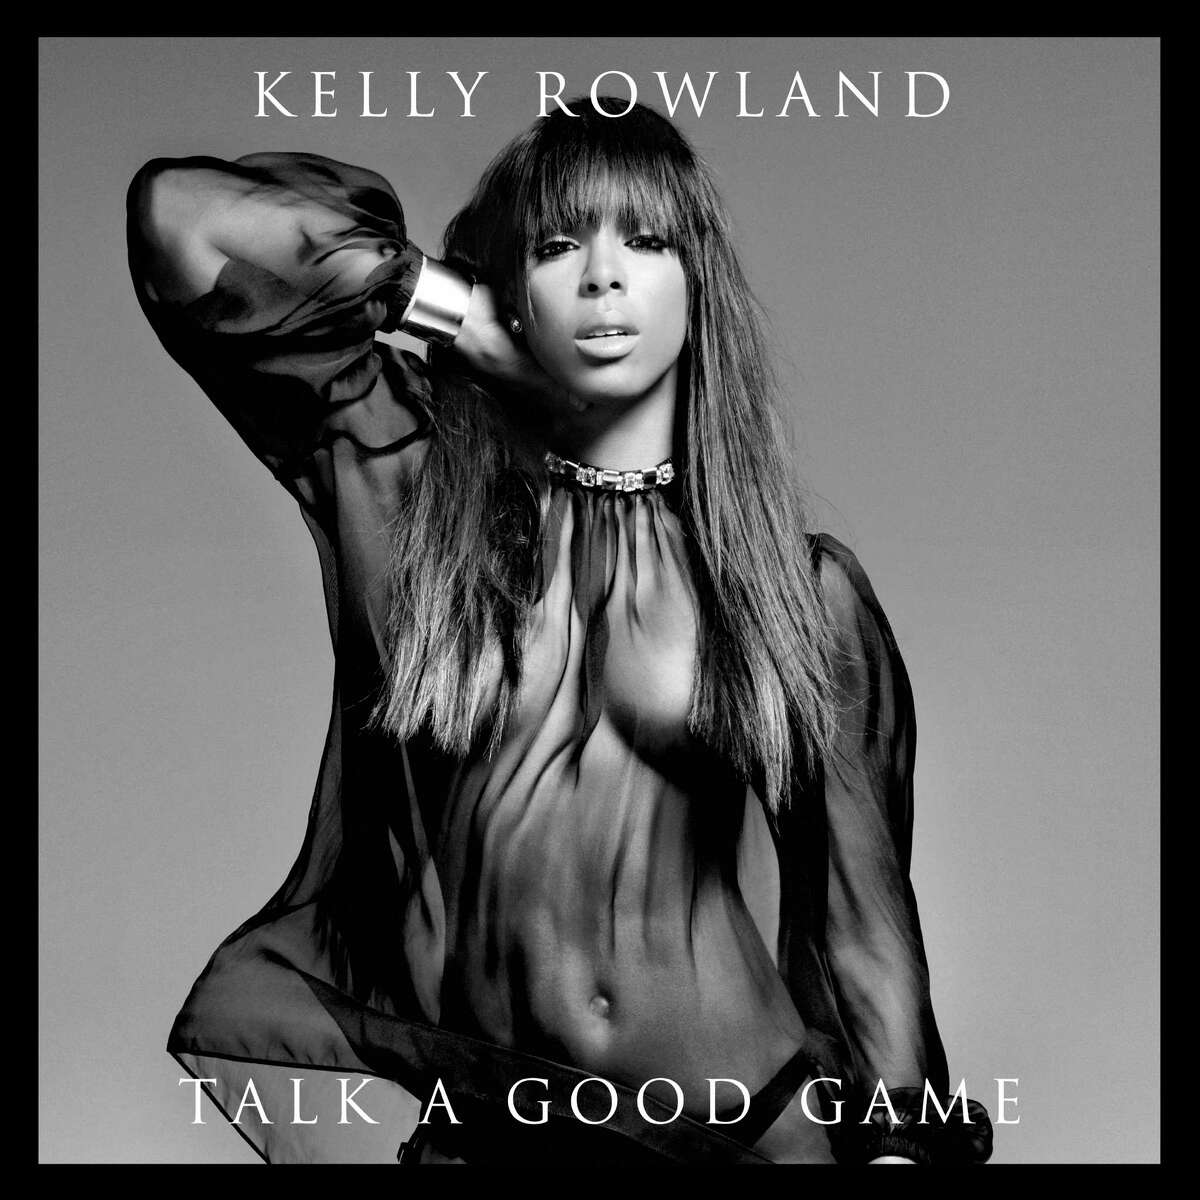 Rowland takes some big chances on her new album cover, "Talk a Good Game."